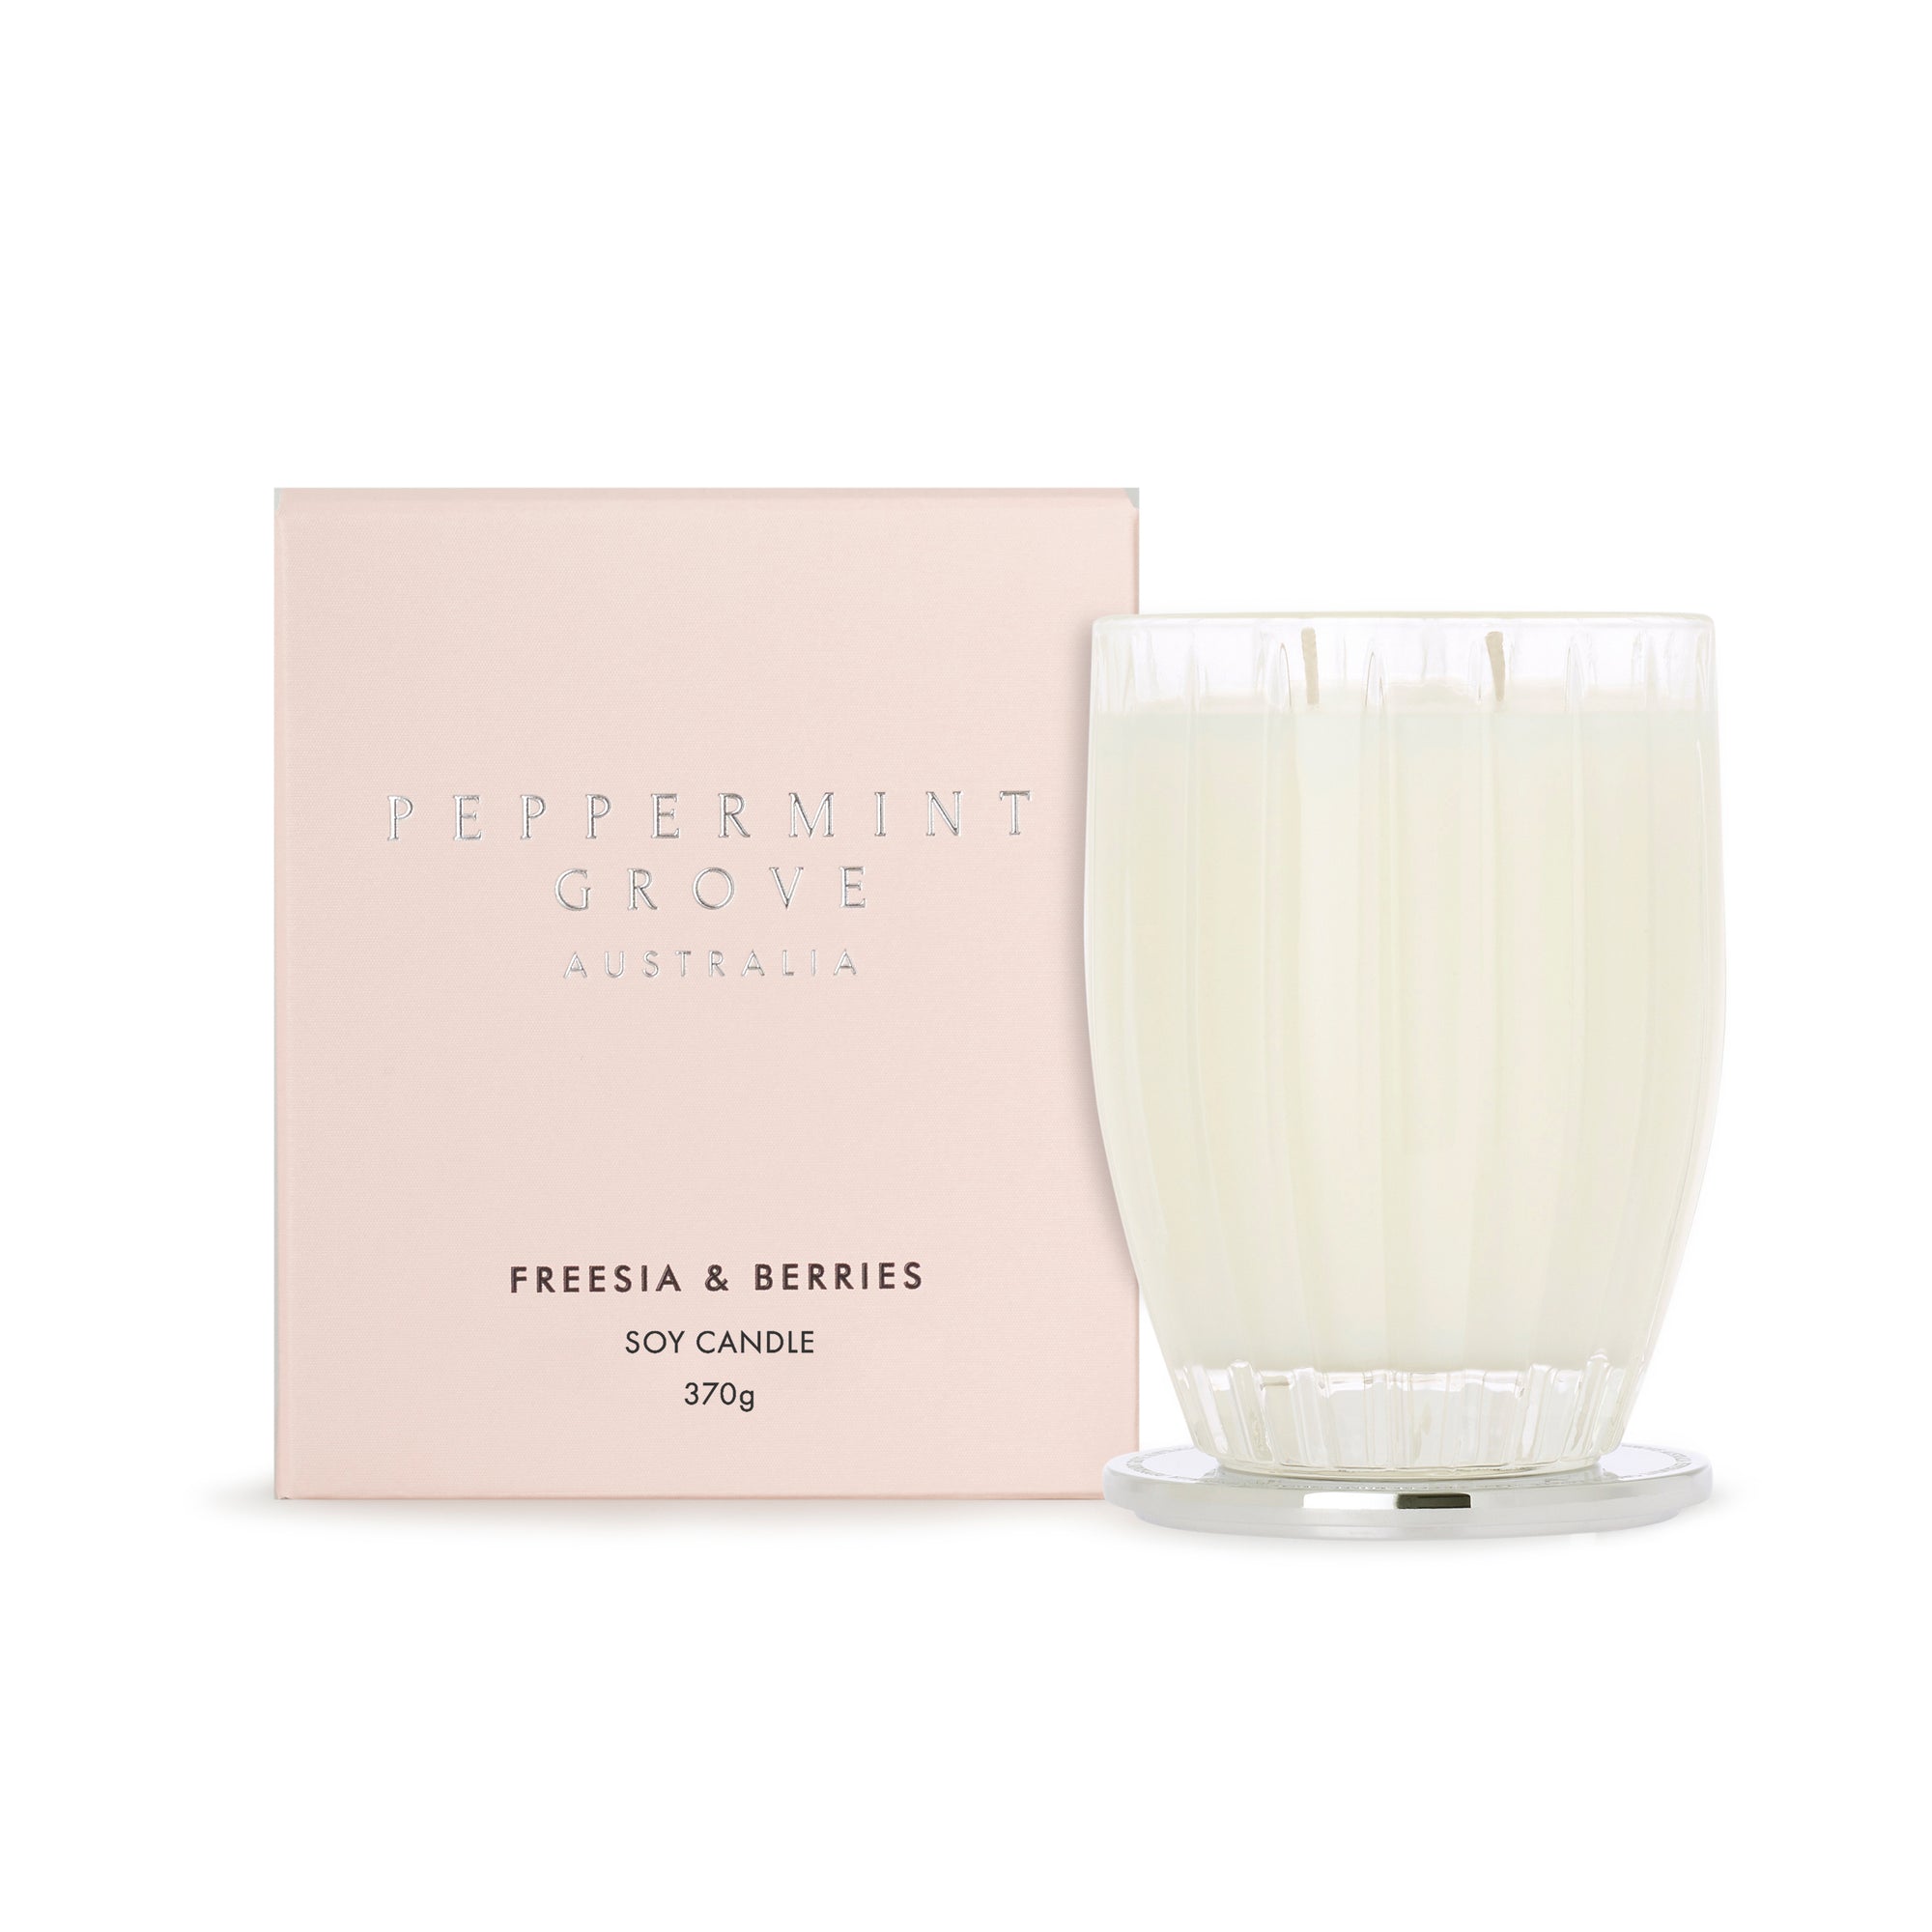 Peppermint Grove Freesia & Berries Large Soy Candle 370g